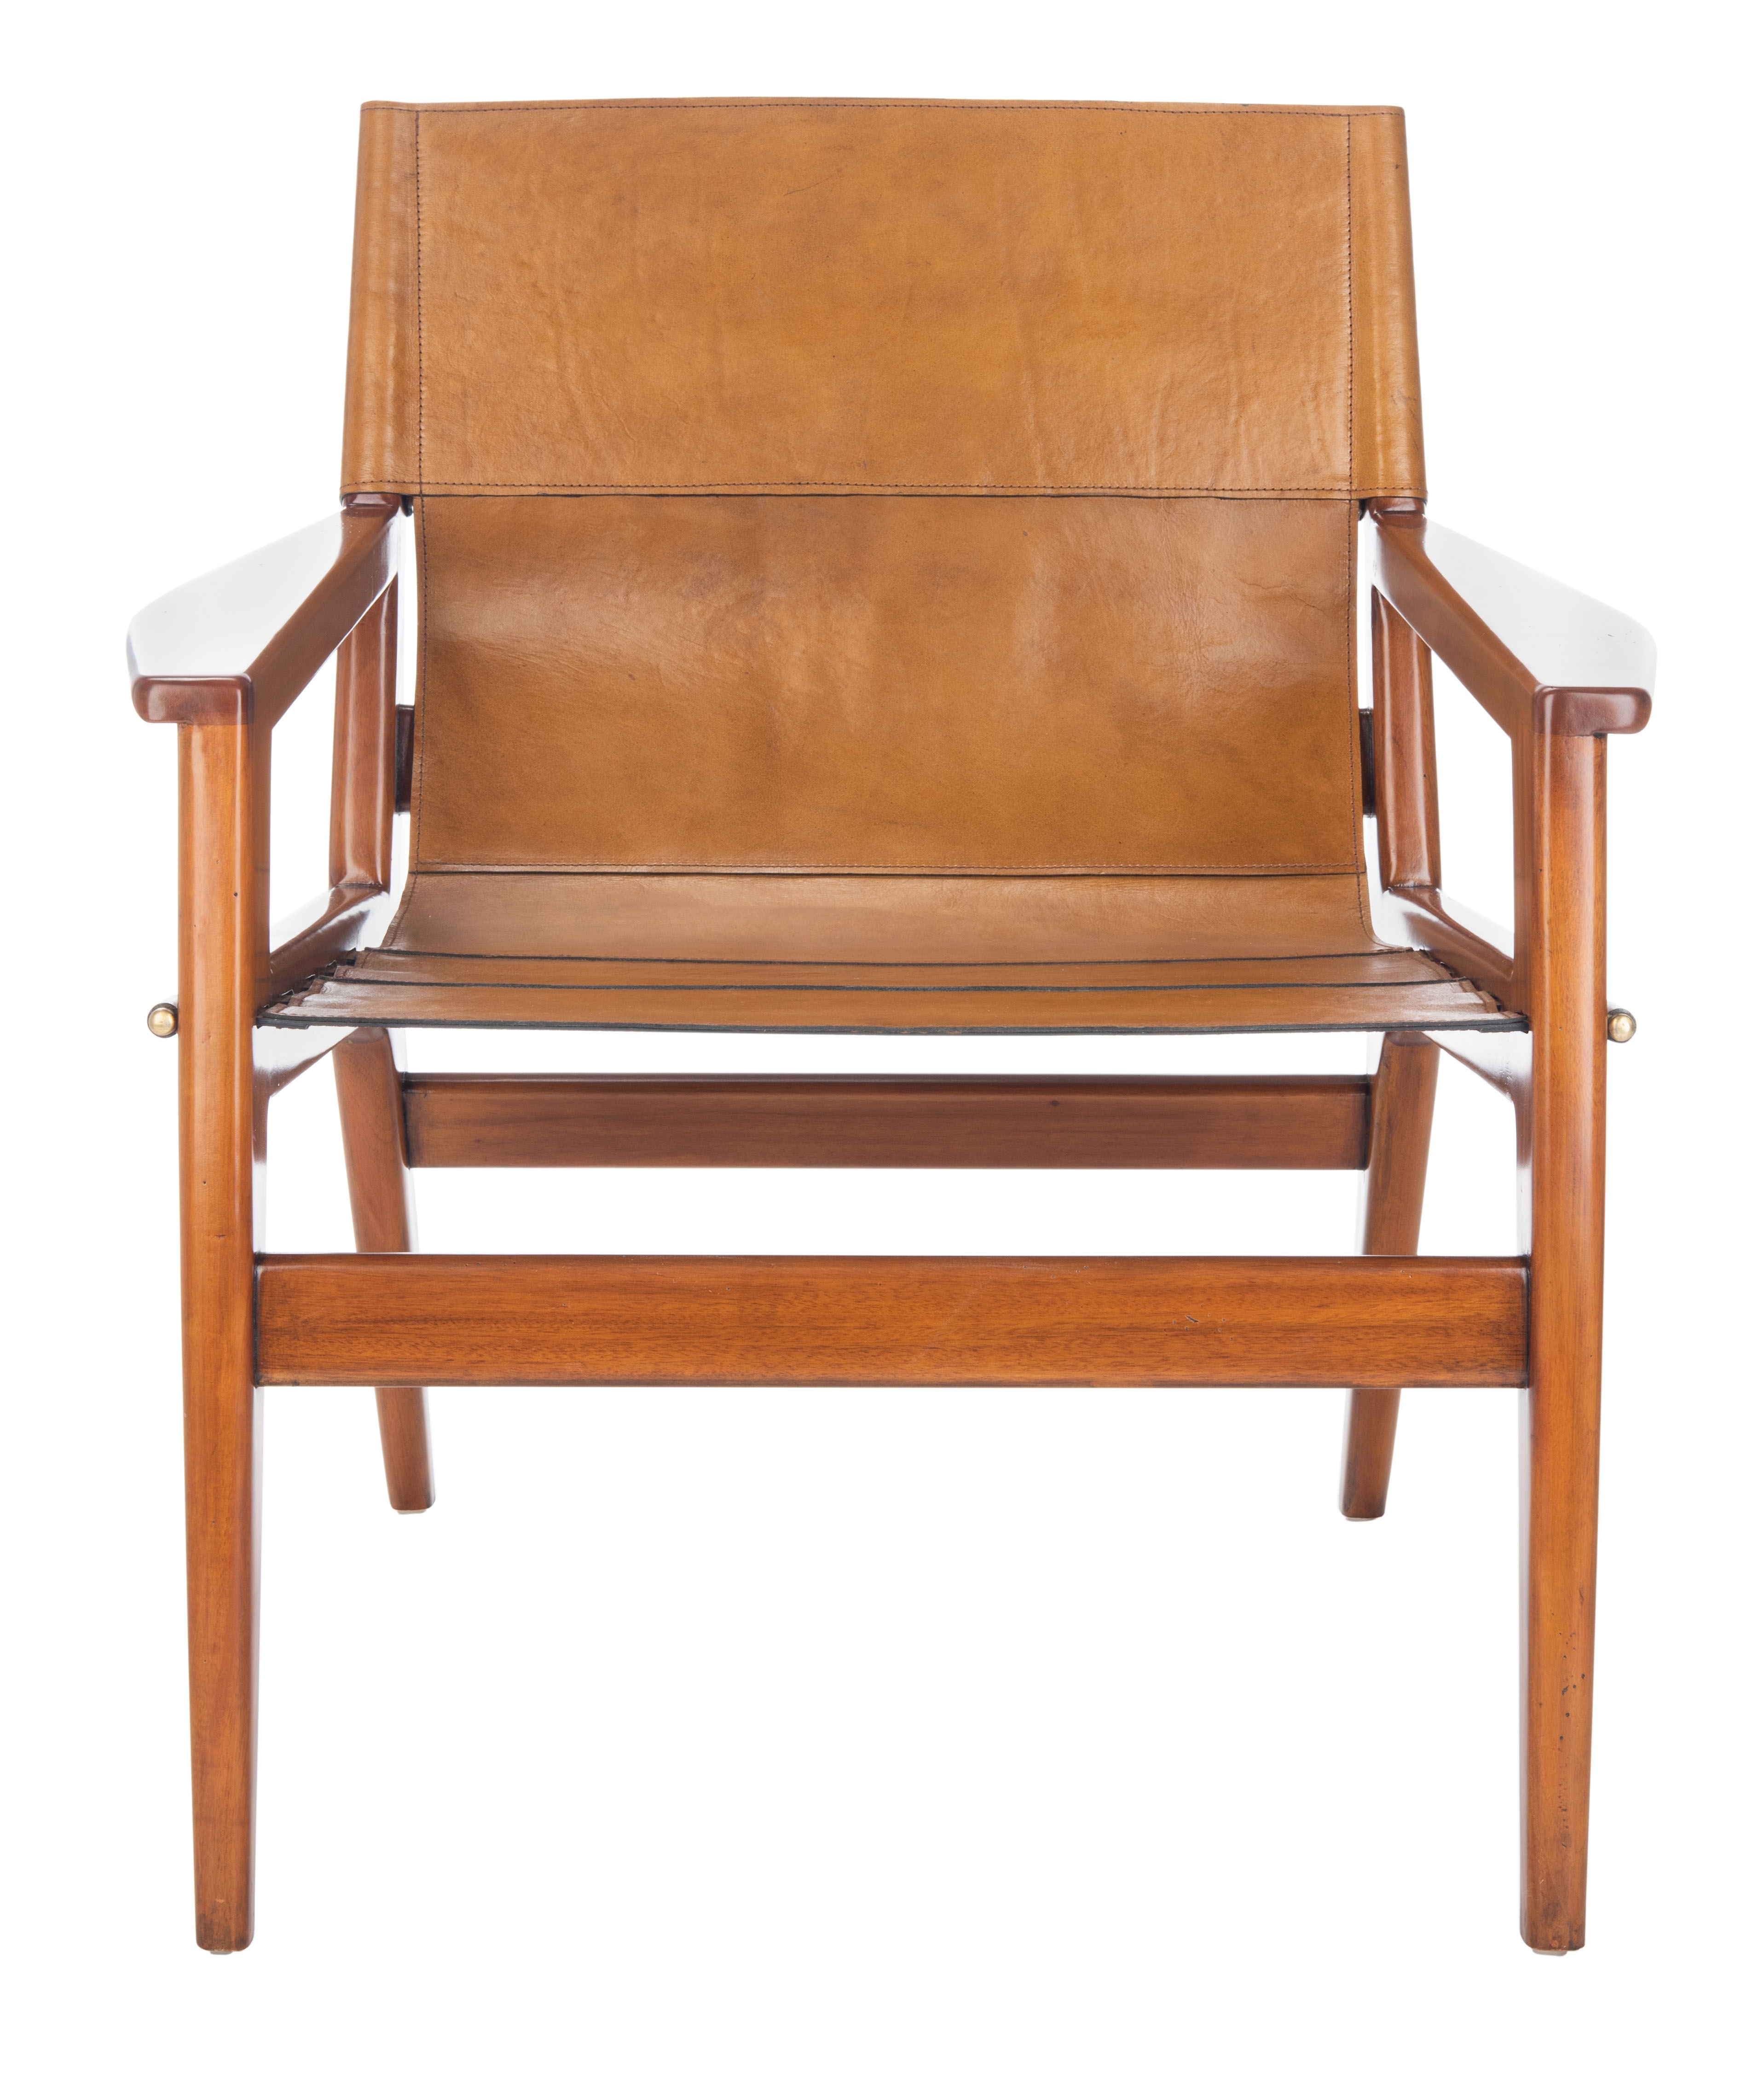 Pavati Leather Sling Chair, Brown - Image 1